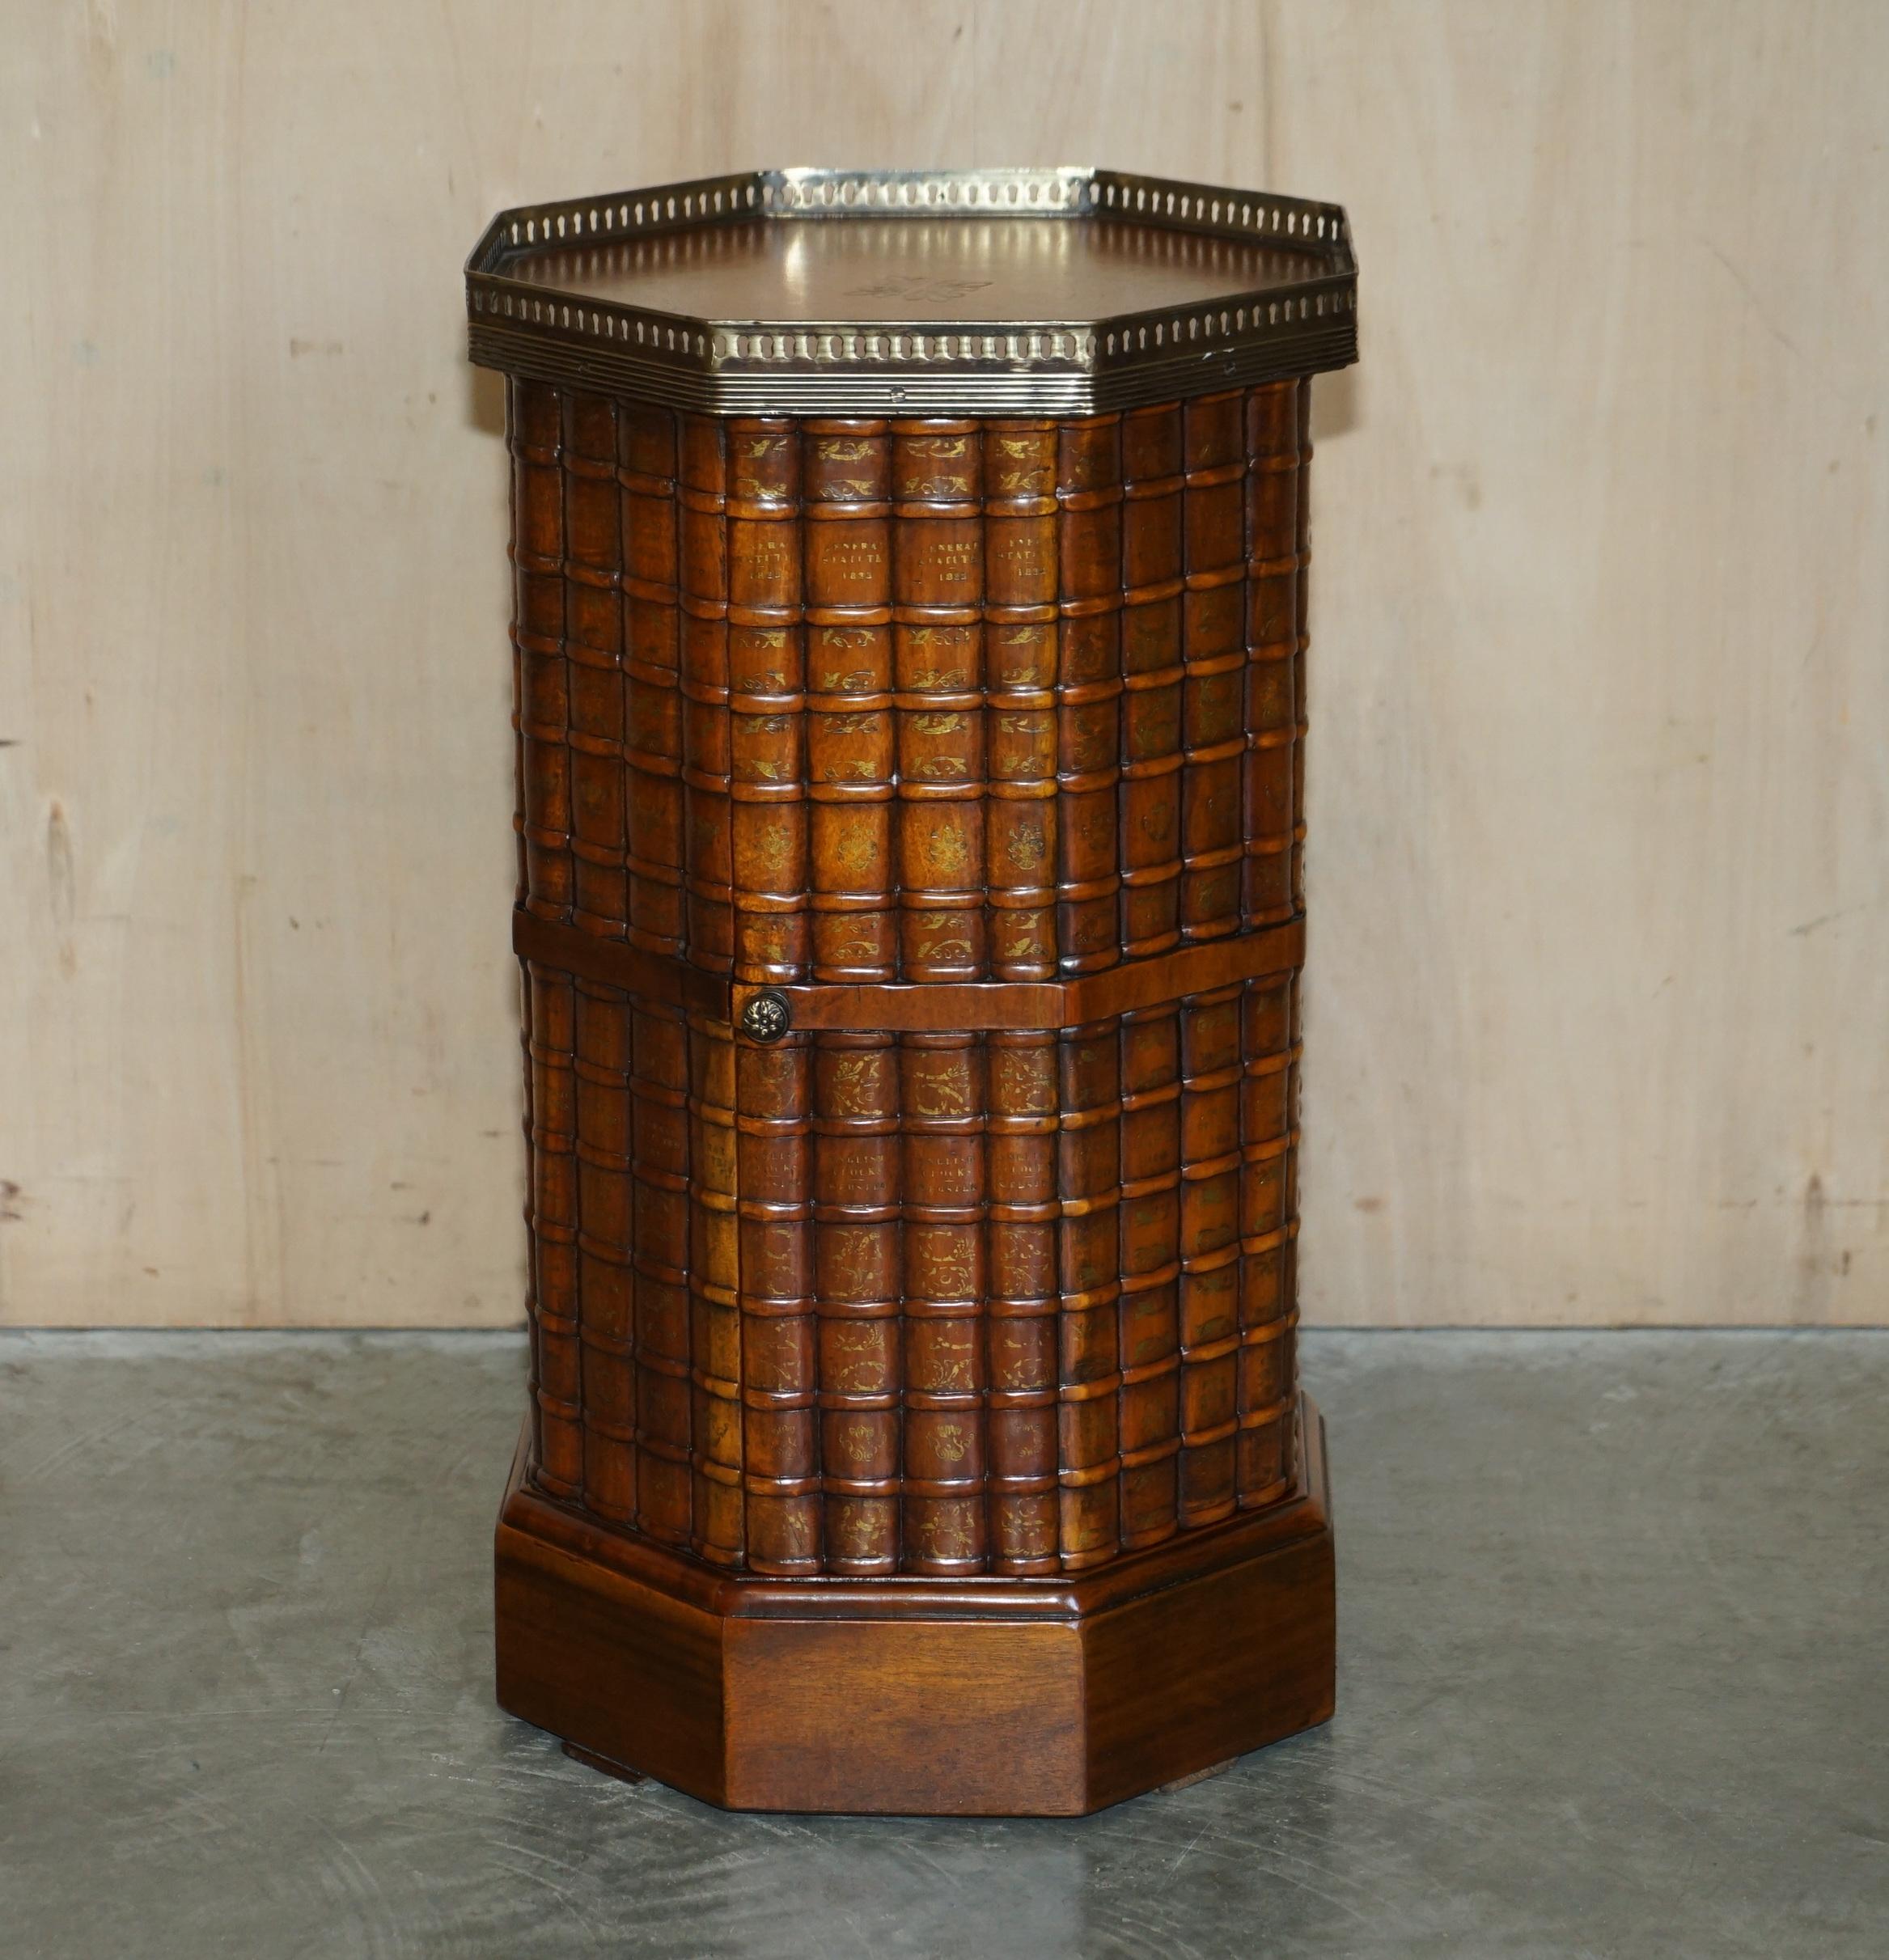 We are delighted to offer for sale this lovely Theodore Alexander faux book side table with embossed brown leather top and brass gallery rail.

A very nicely made side table in solid hardwood, it has a faux books on all sides which is reminiscent